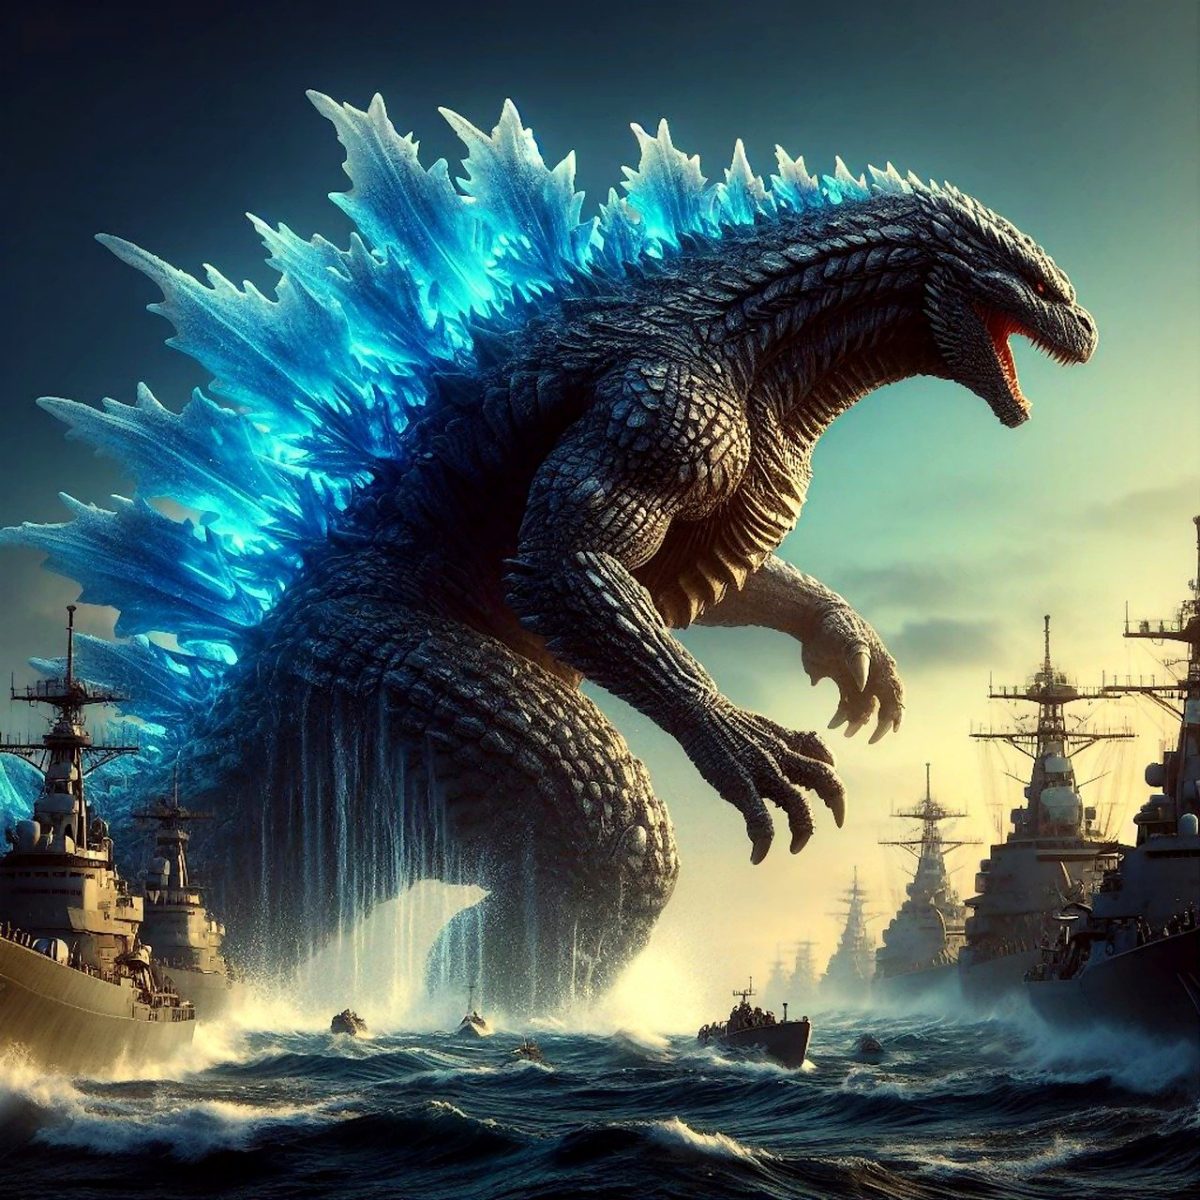 Godzilla attacks Japans navy. The destruction he causes comes right after WW2.